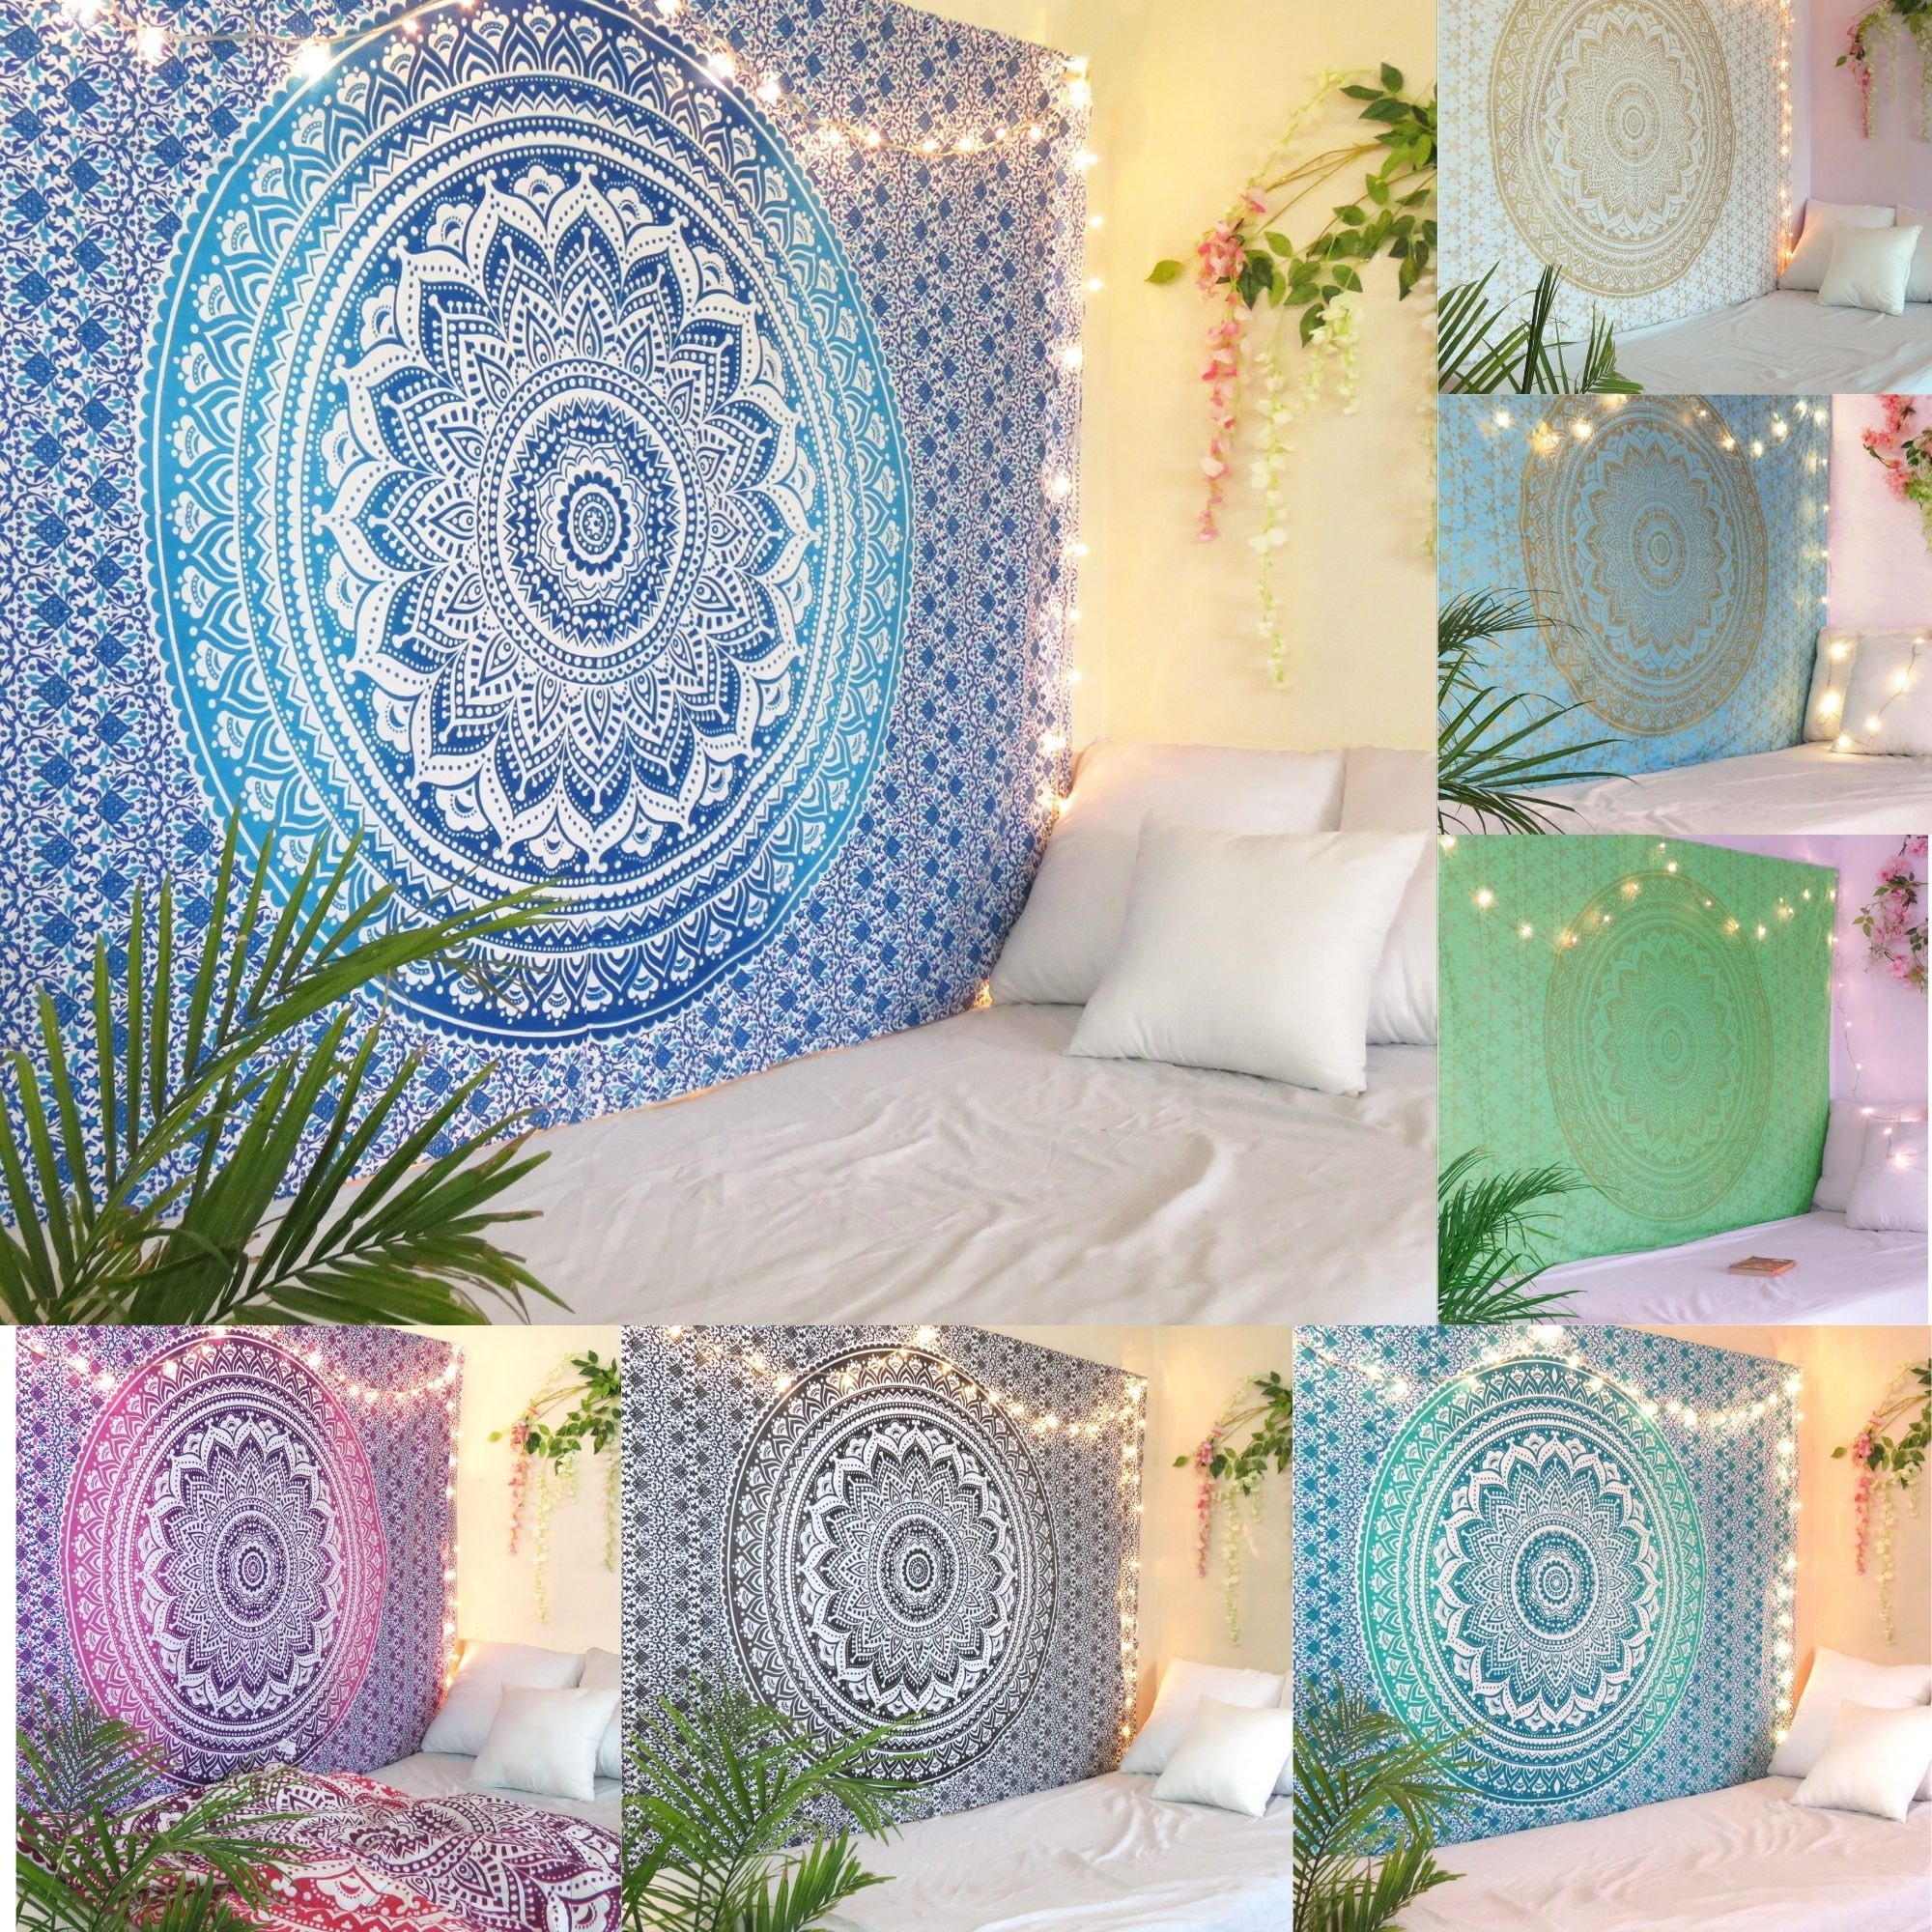 Hippie Tapestry Mandala Wall Hanging Tapestries Bedspread Blankets Home Decor 